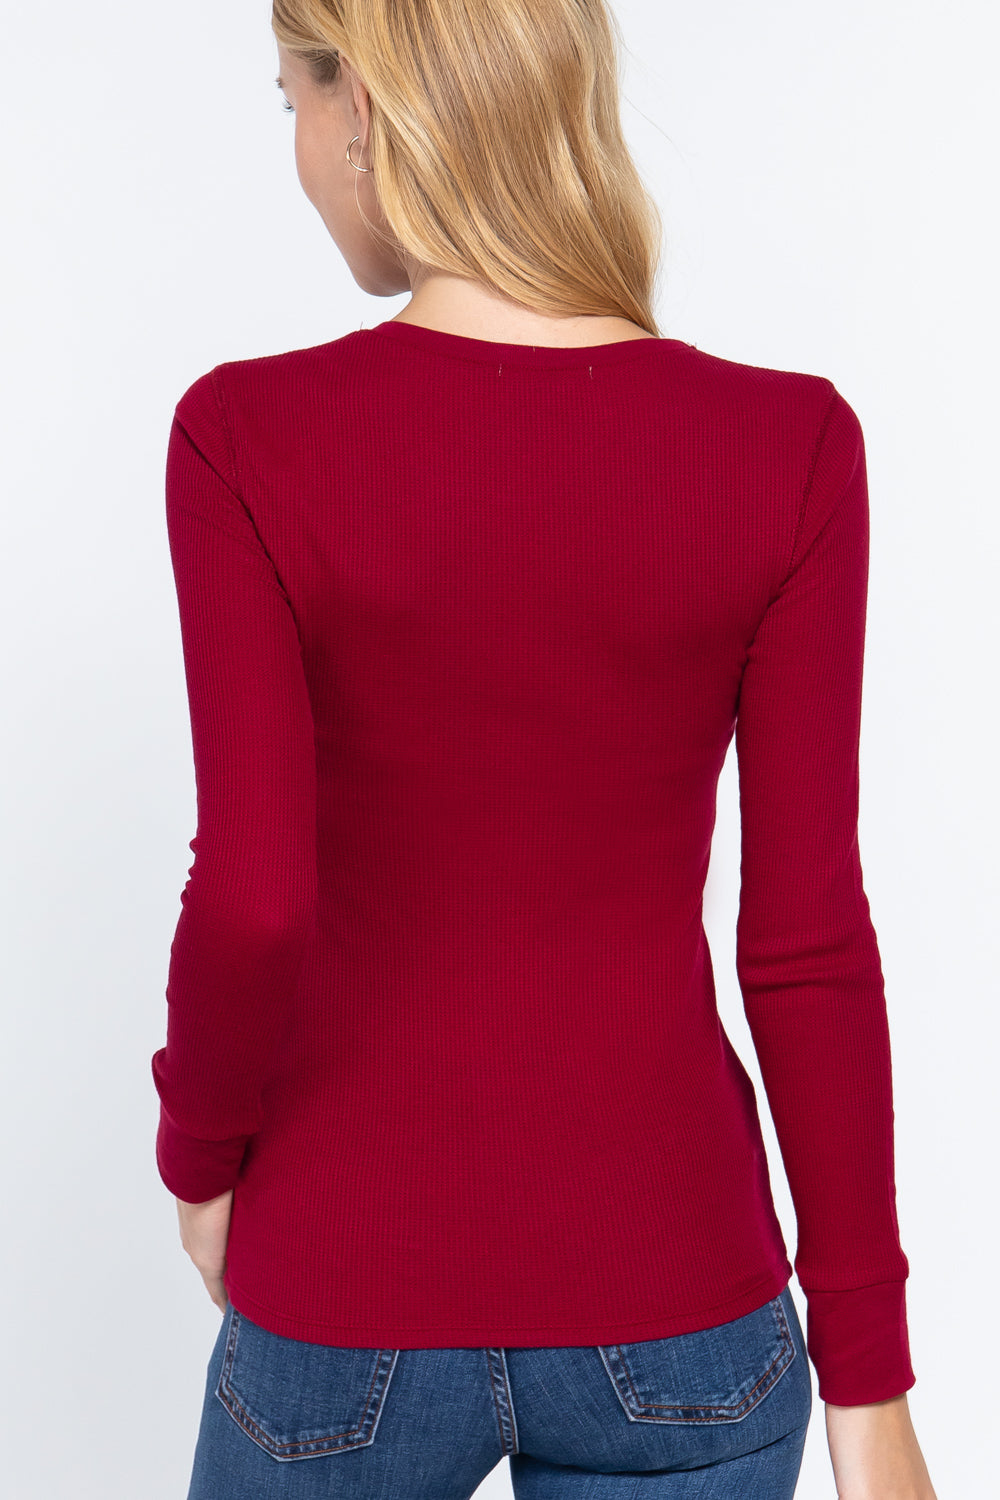 Wine Red Long Sleeve Waffle Knit Stretch Cotton Henley Thermal Top Shirt Shirts & Tops jehouze 